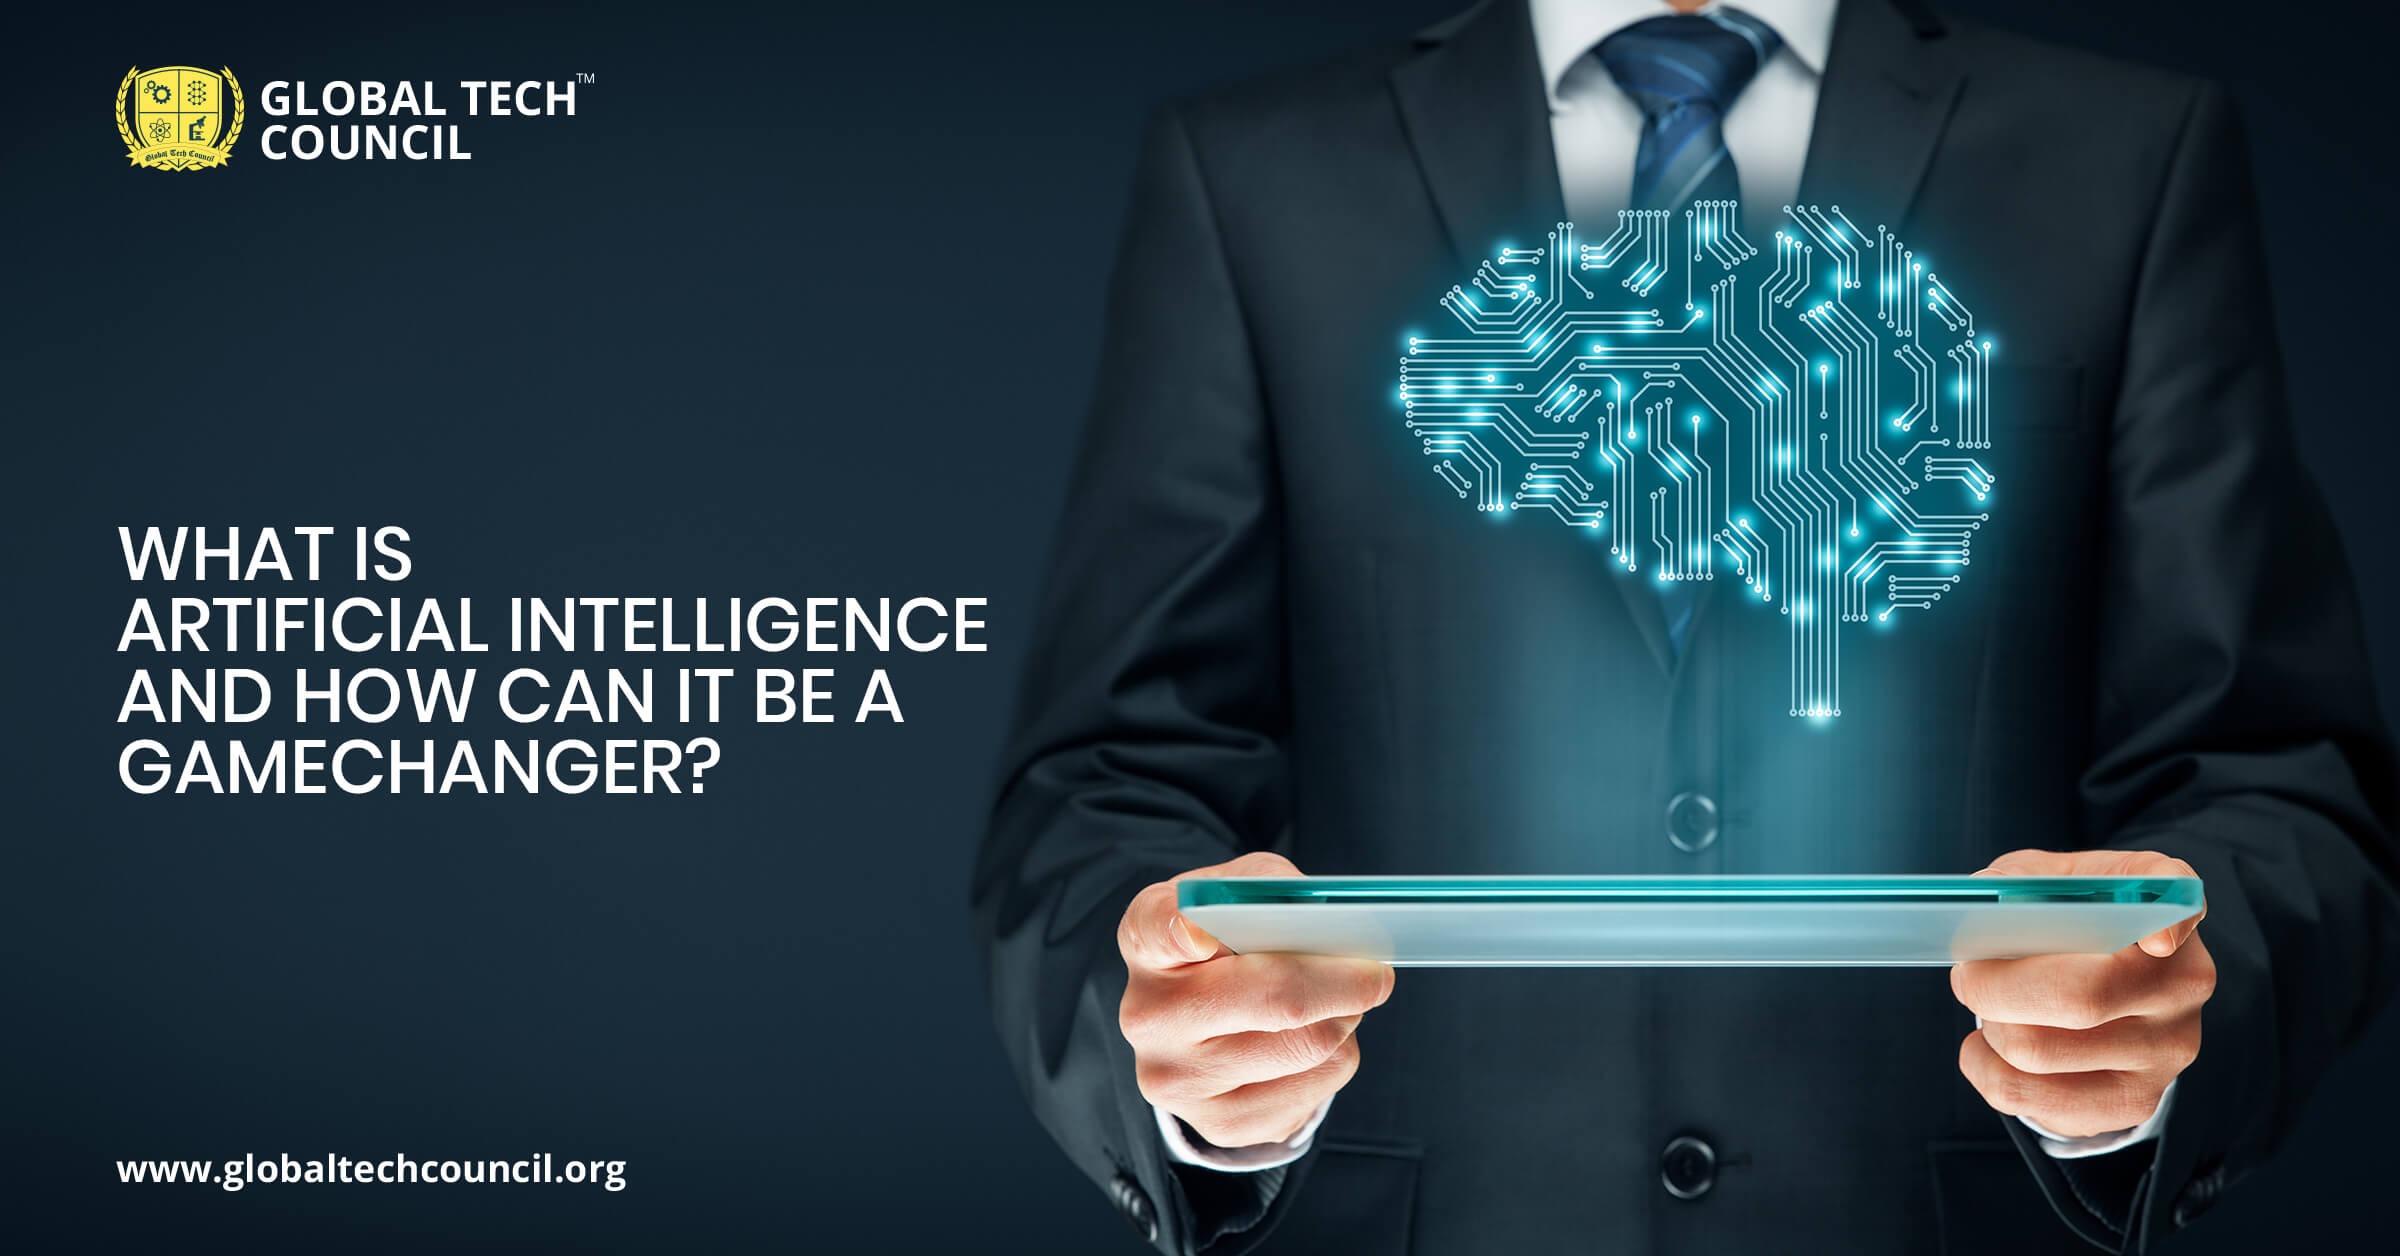 What is artificial intelligence and how can it be a gamechanger